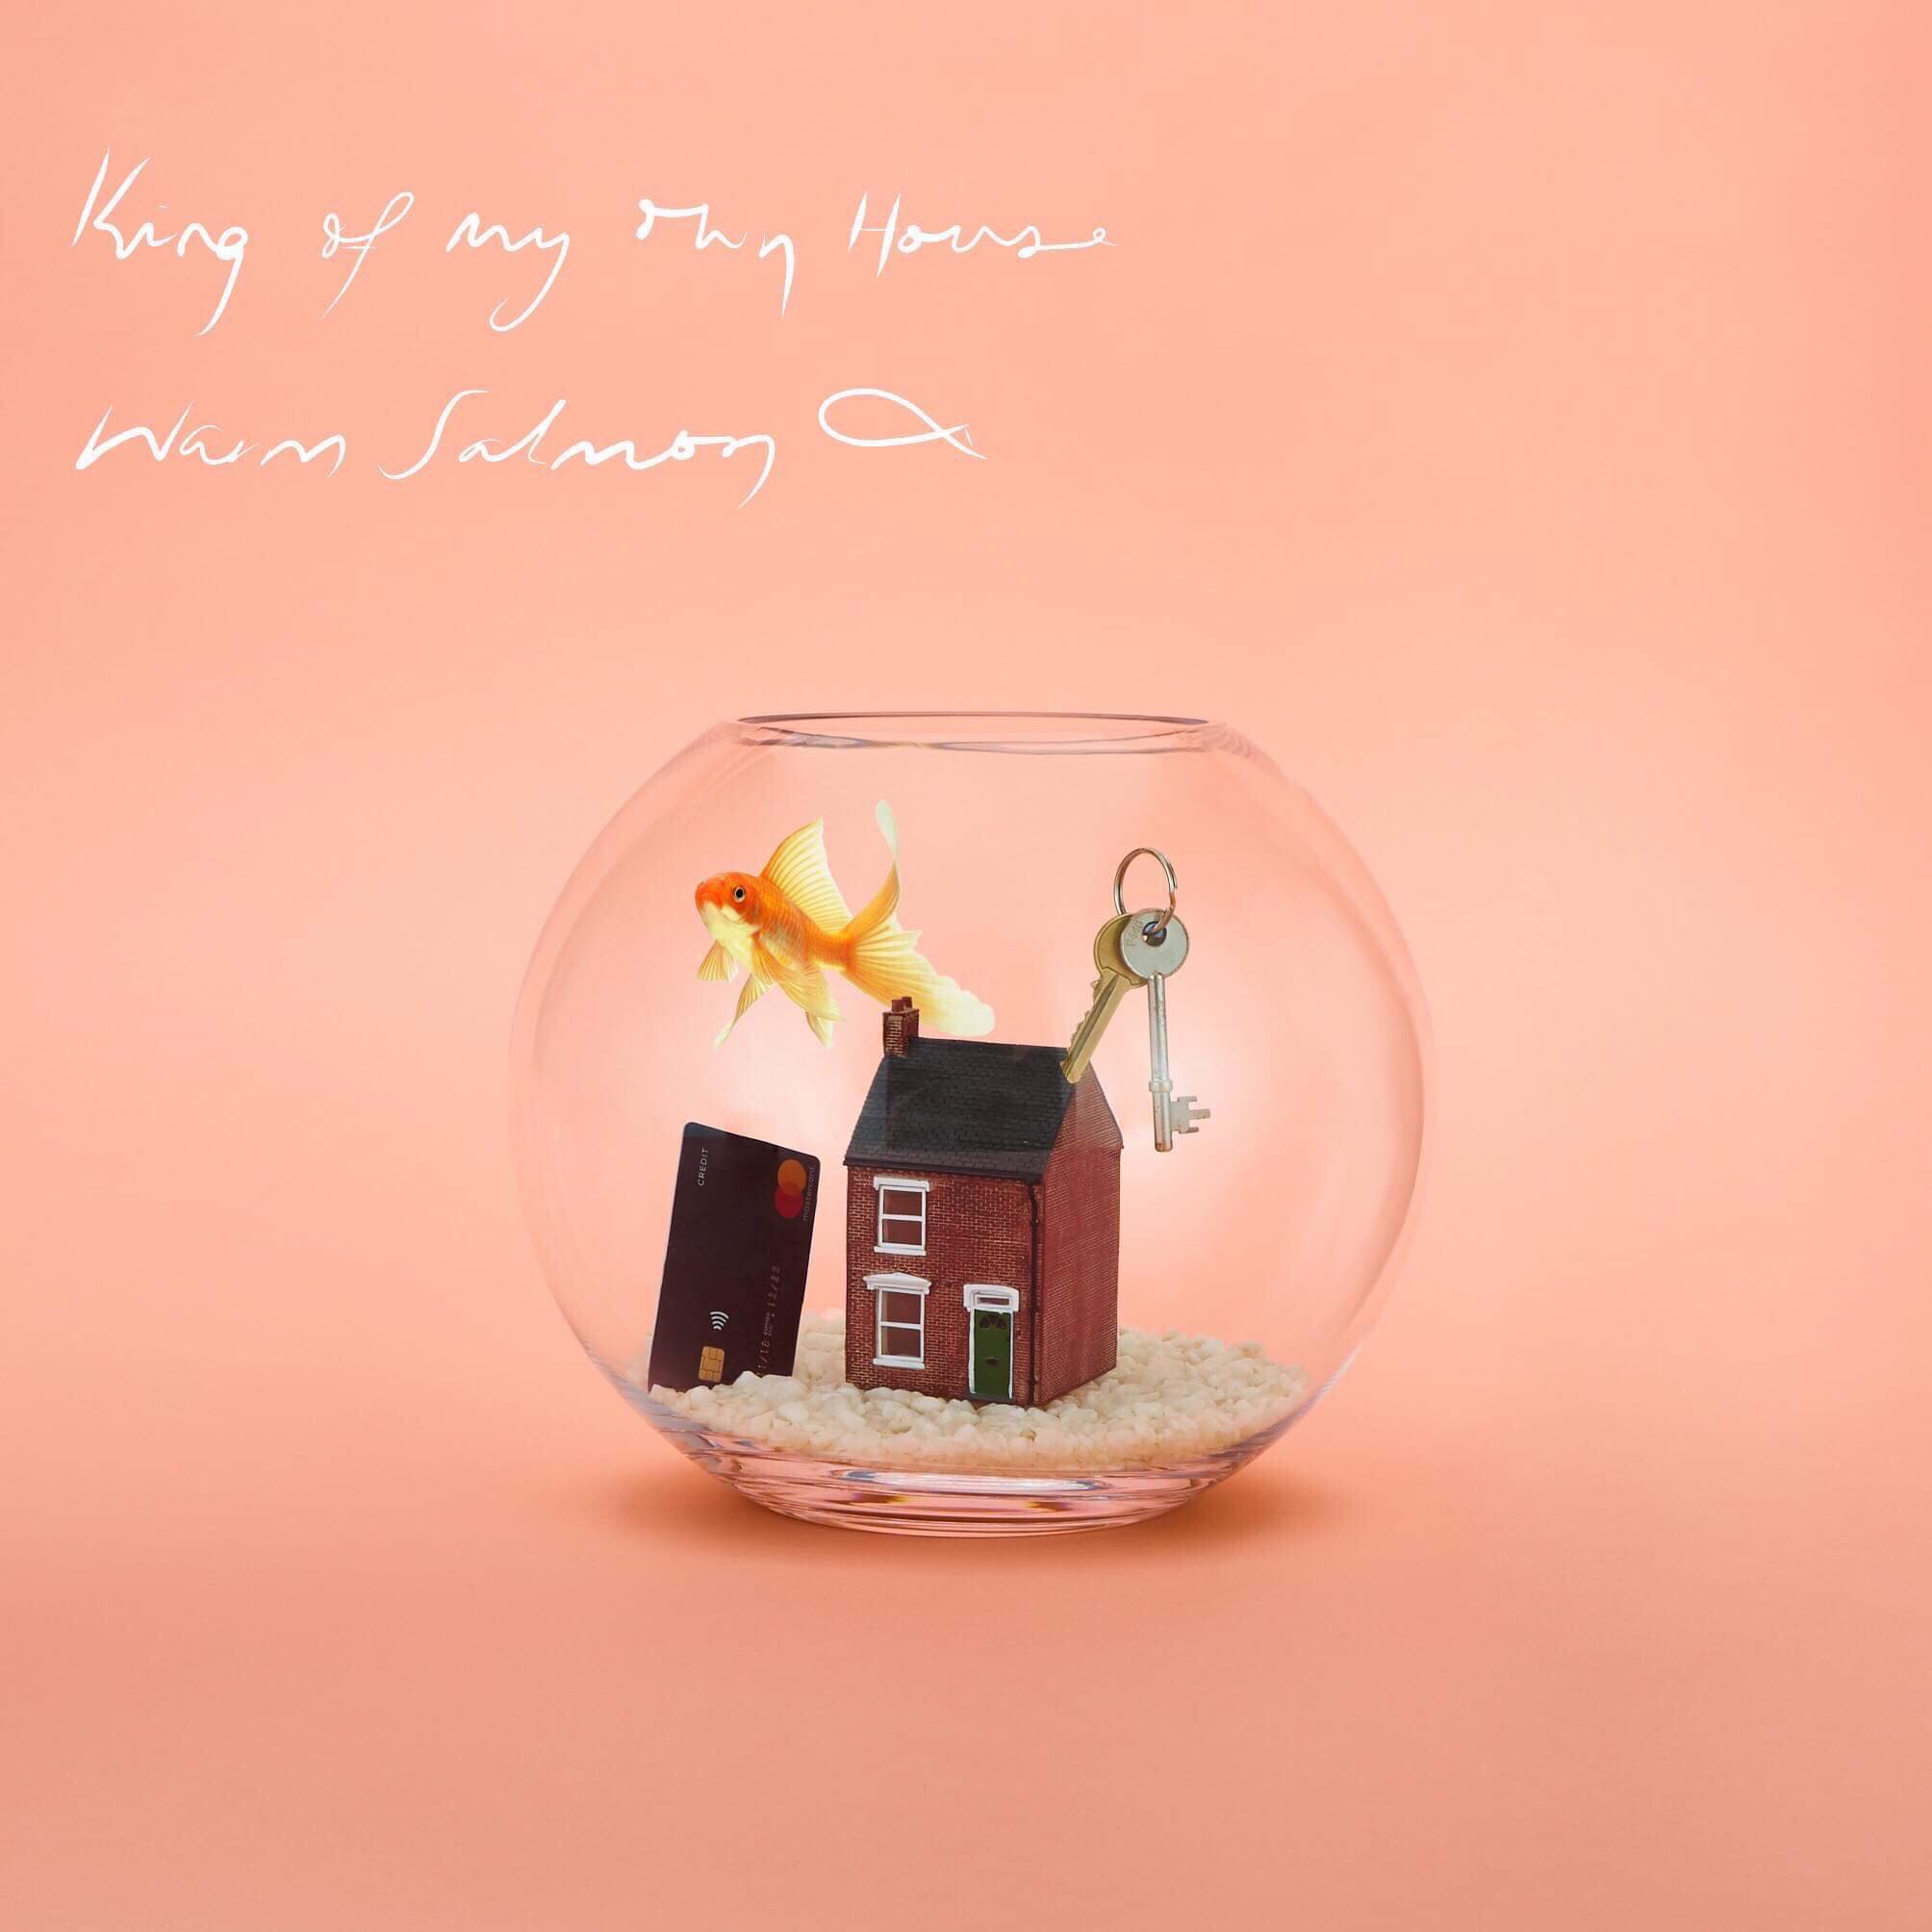 Warm Salmon: "King Of My Own House" 